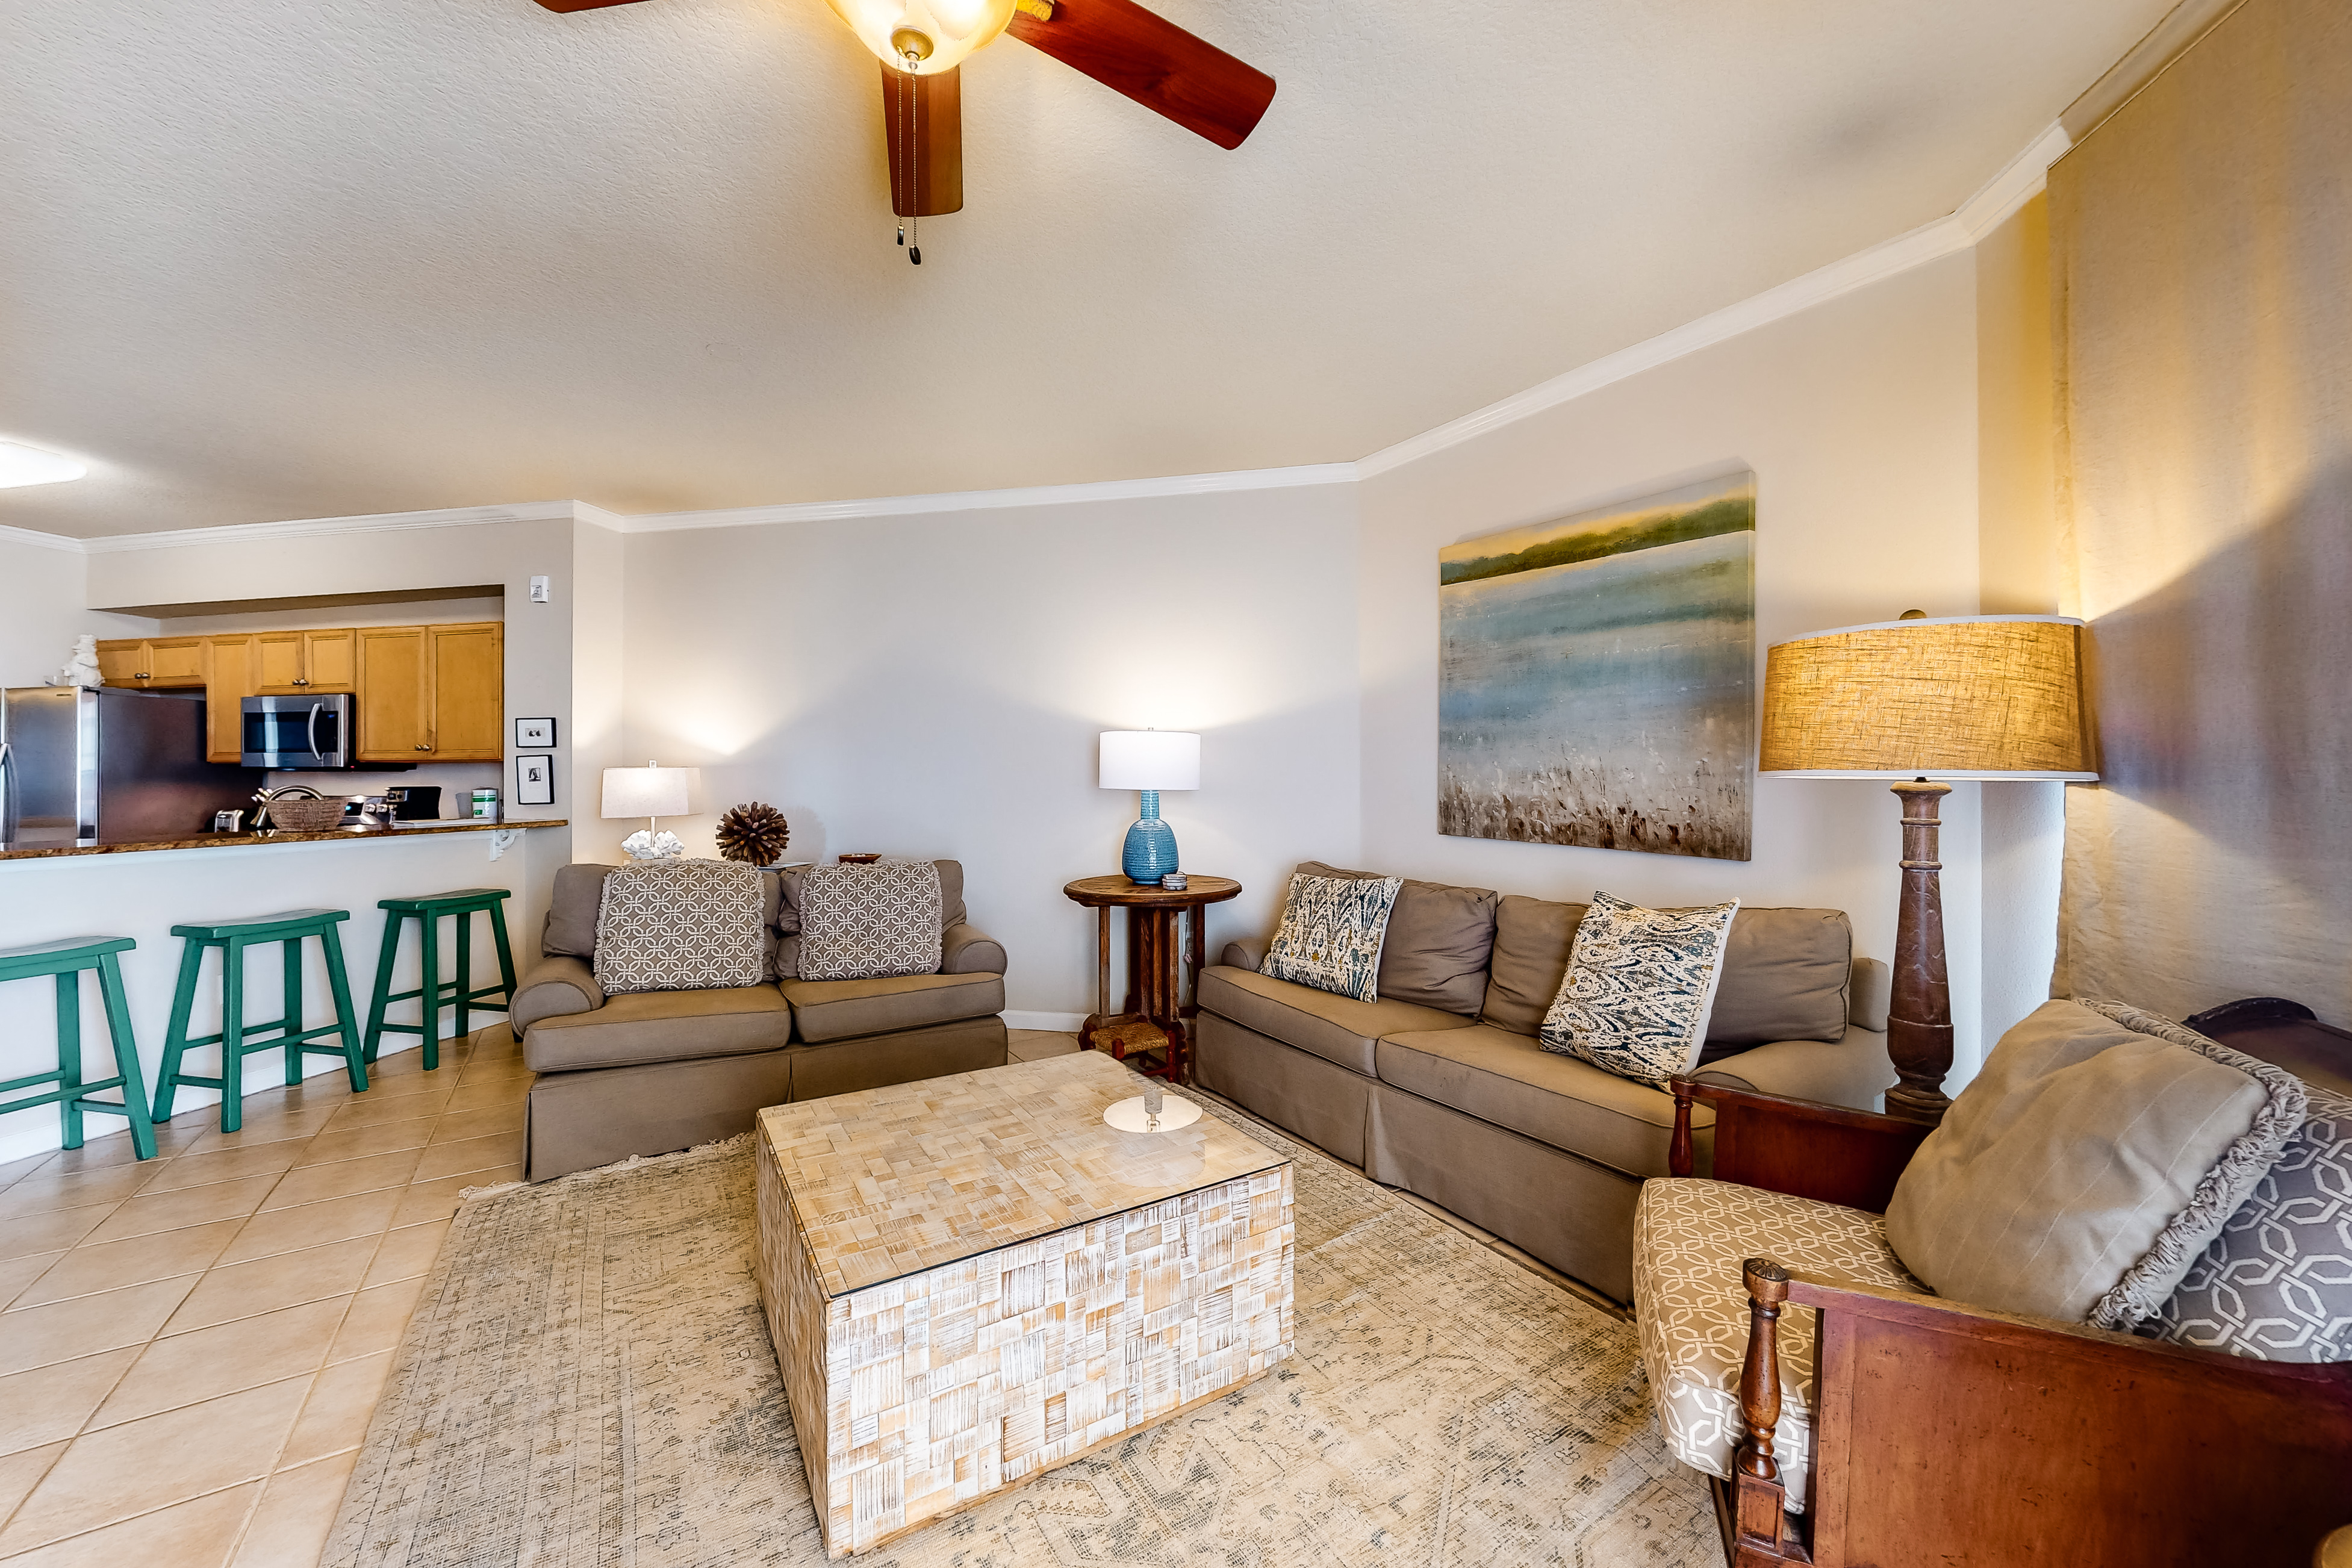 Dunes of Seagrove A303 Condo rental in Dunes of Seagrove in Highway 30-A Florida - #3